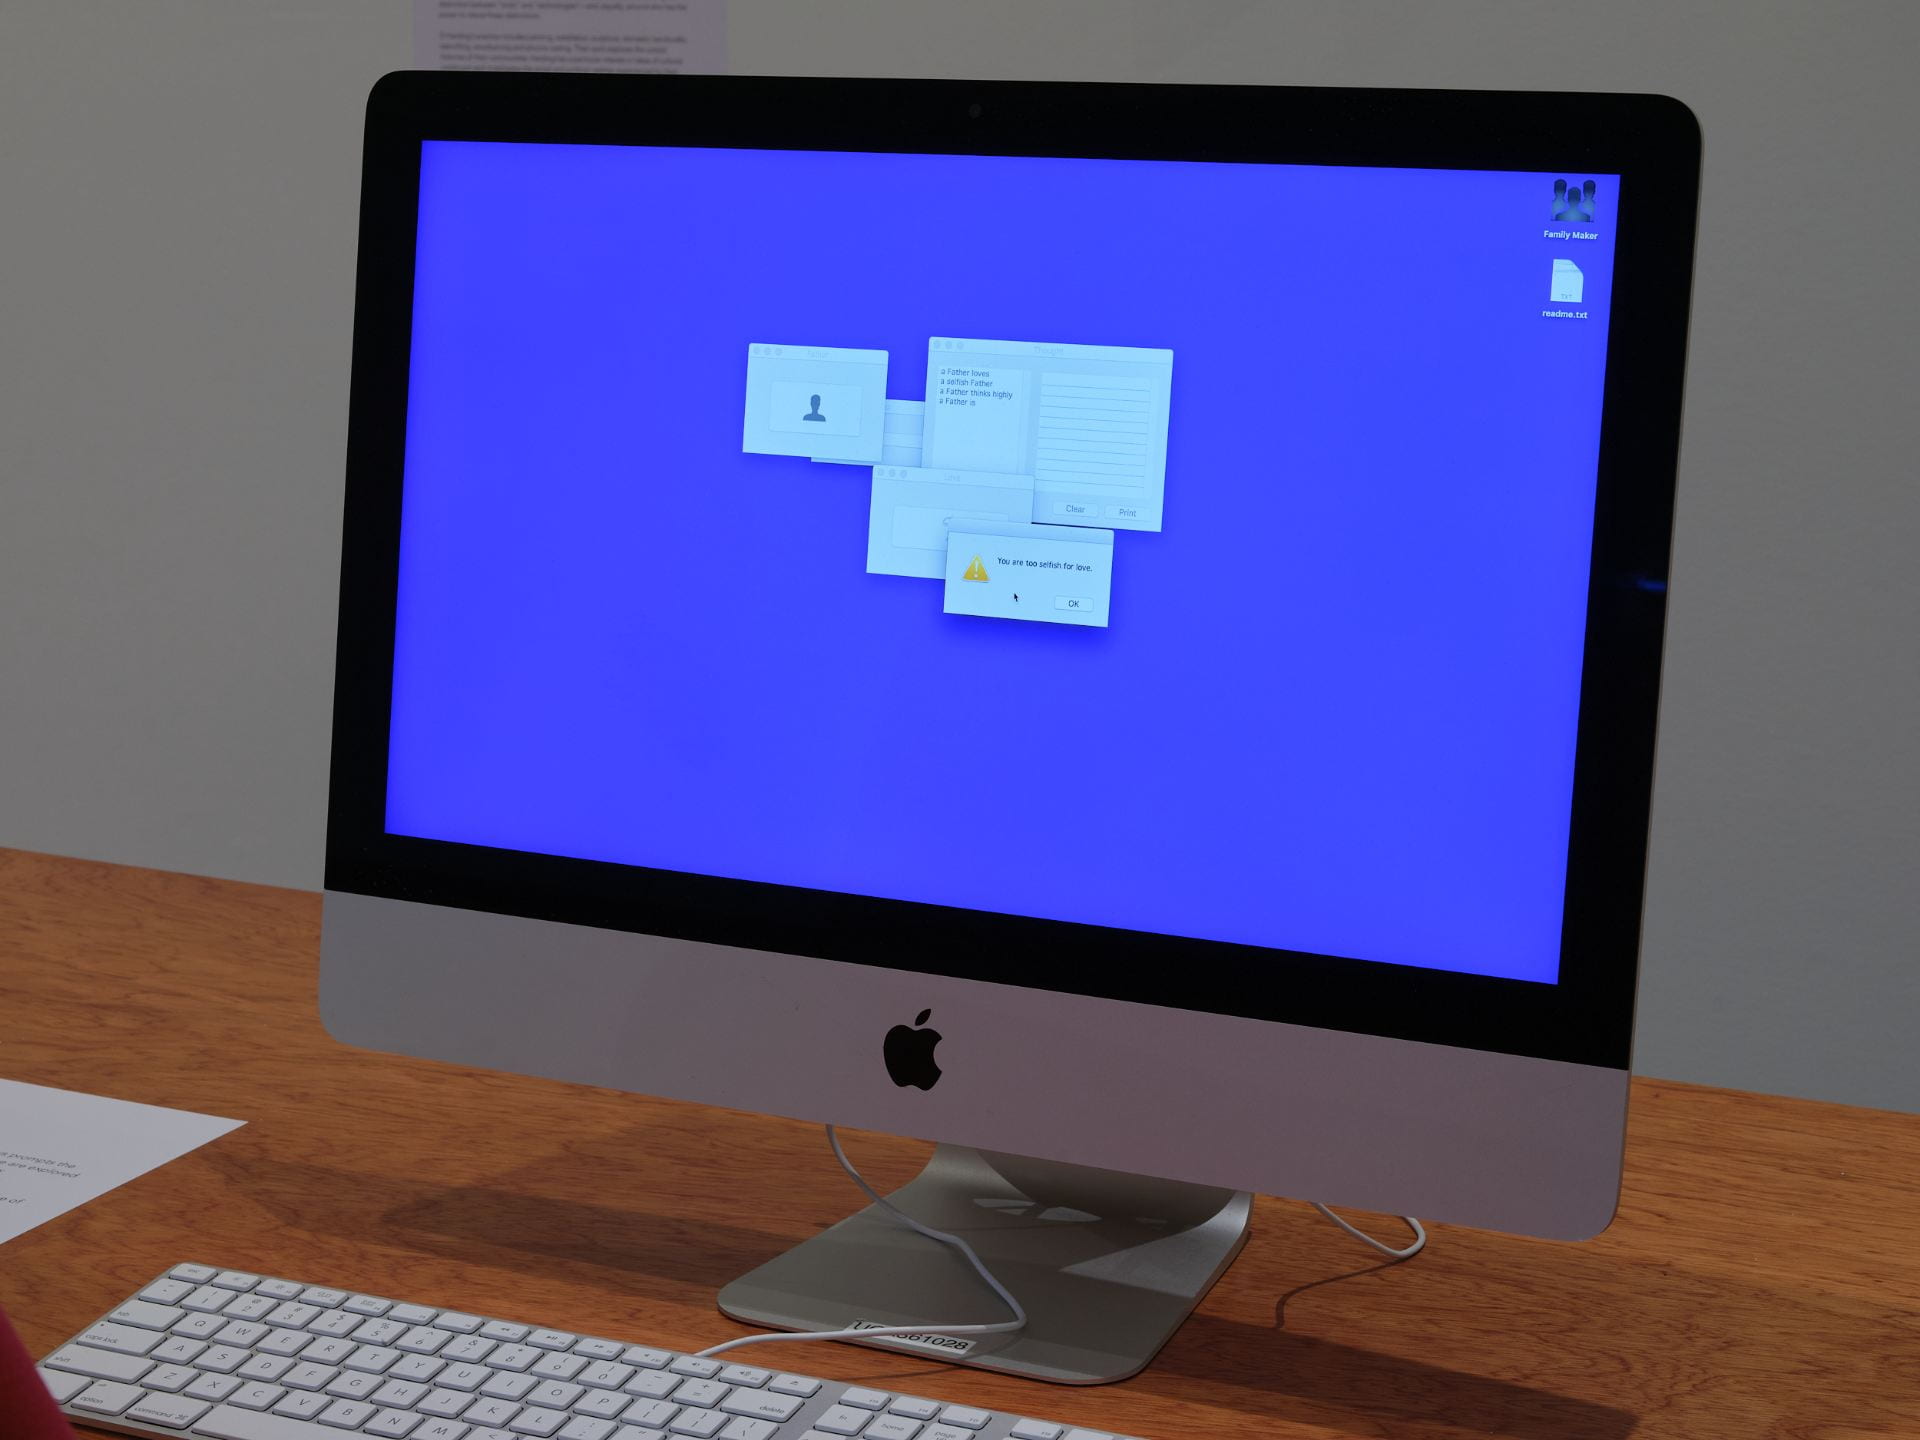 A Mac computer sits on a table. On the computer, a software application is open against a bright purple background. The application has lots of little windows clustered in the centre of the desktop.